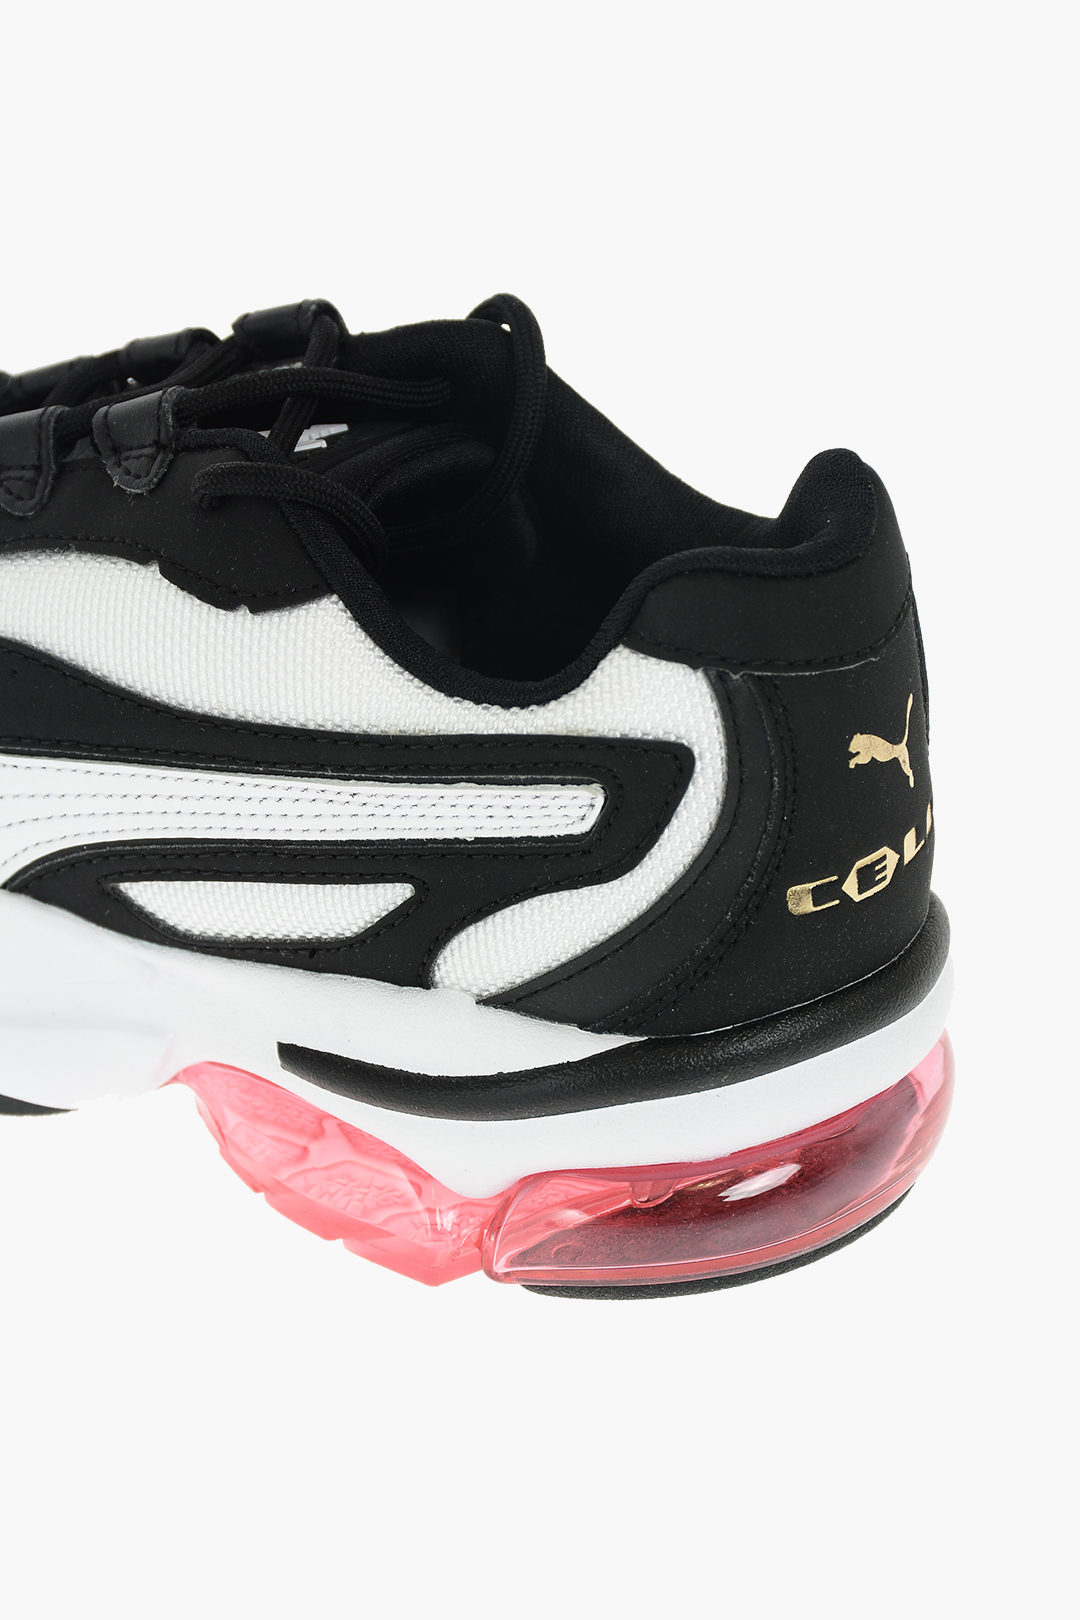 Puma two-tone CELL STELLAR sneakers with air bubble sole women - Glamood  Outlet